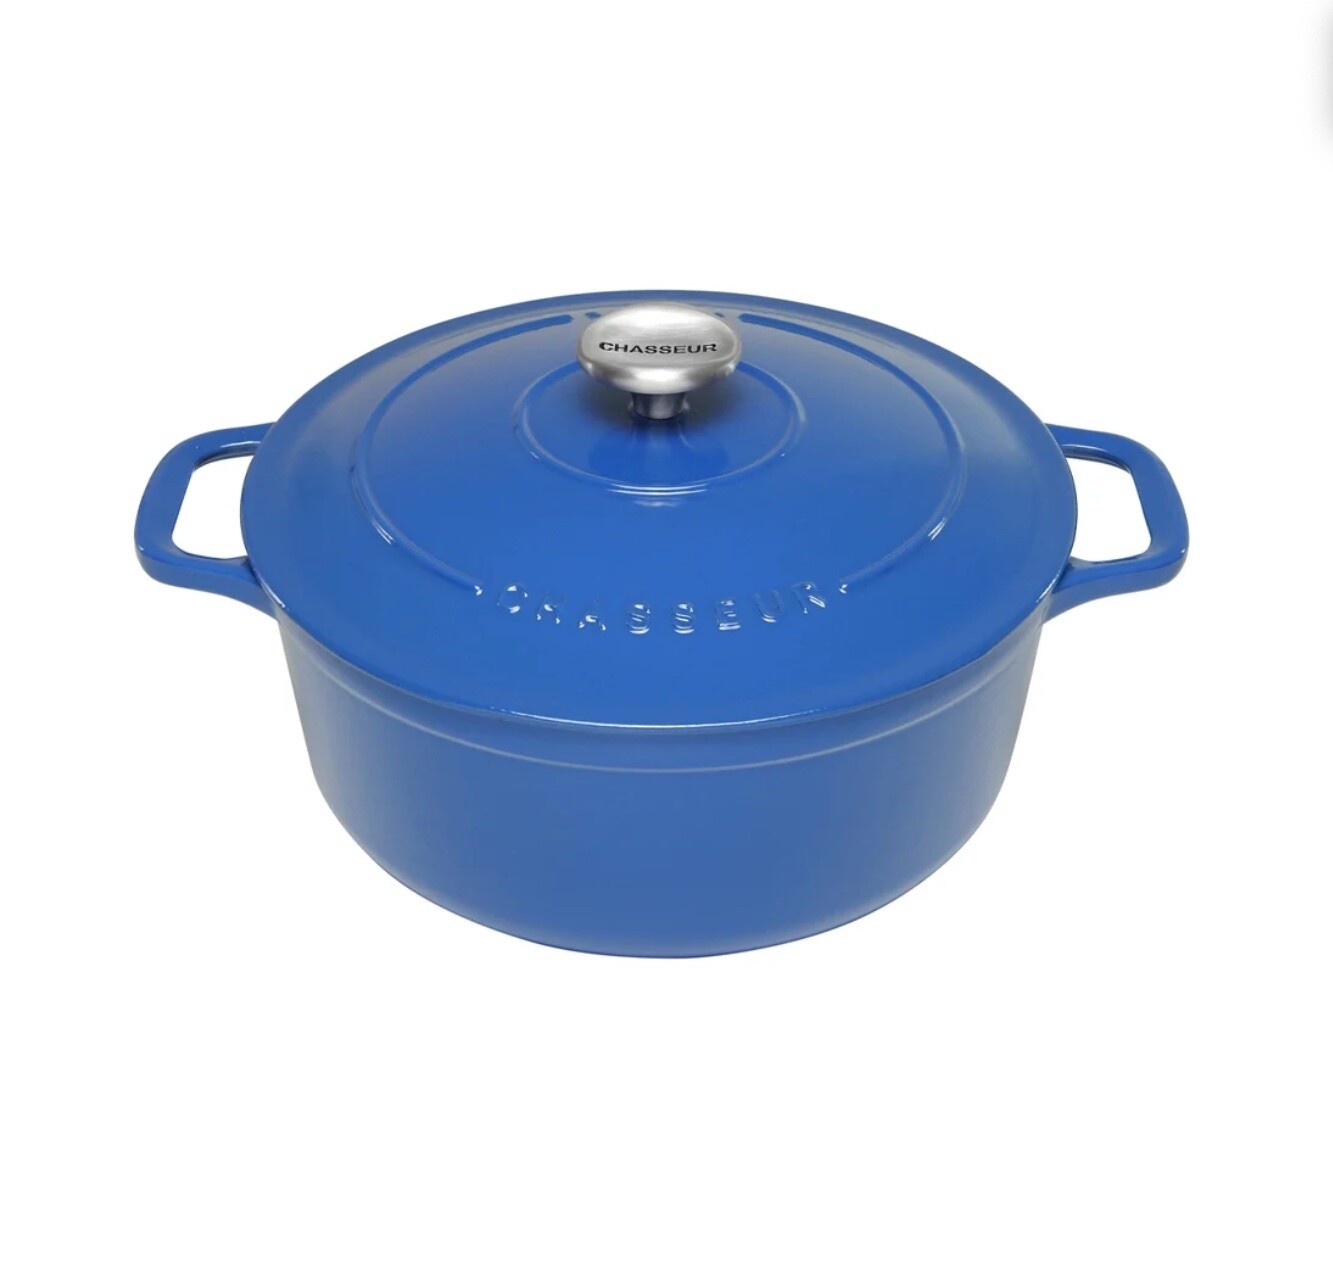 CHASSEUR - French Oven Round 4L, 24CM - Sky Blue